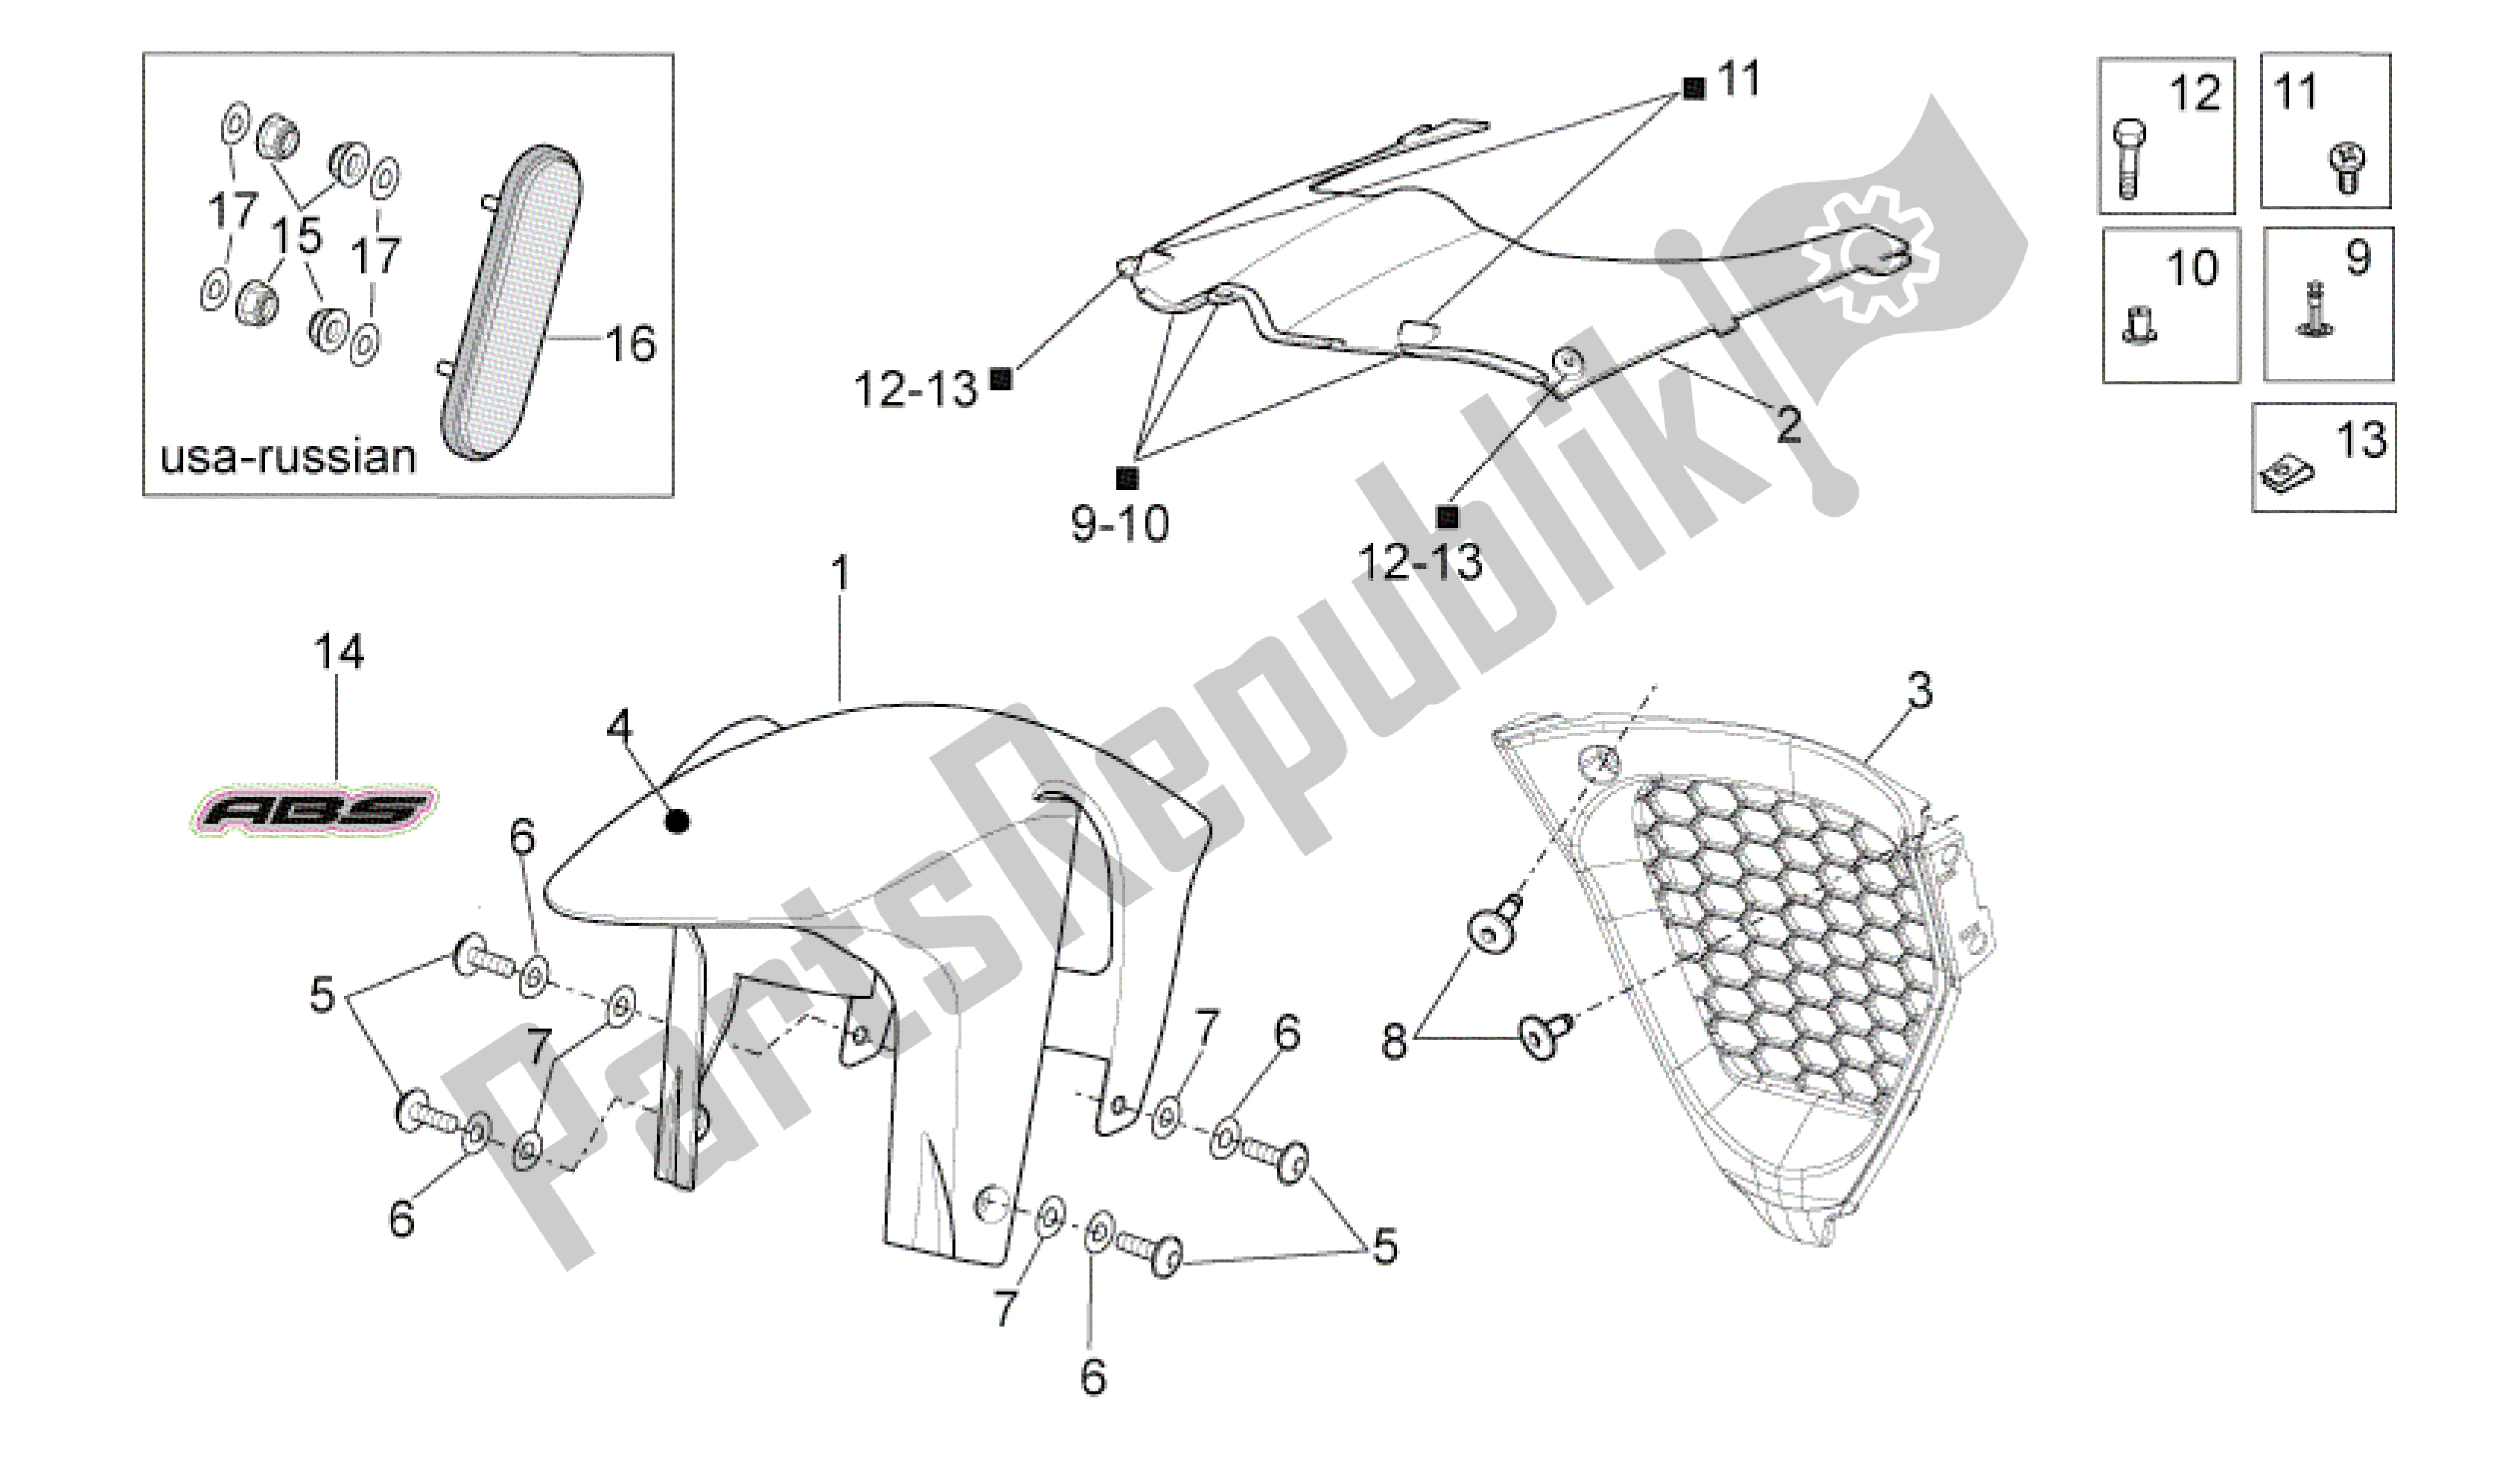 All parts for the Front Body Iii of the Aprilia RSV4 Aprc R ABS 3984 1000 2013